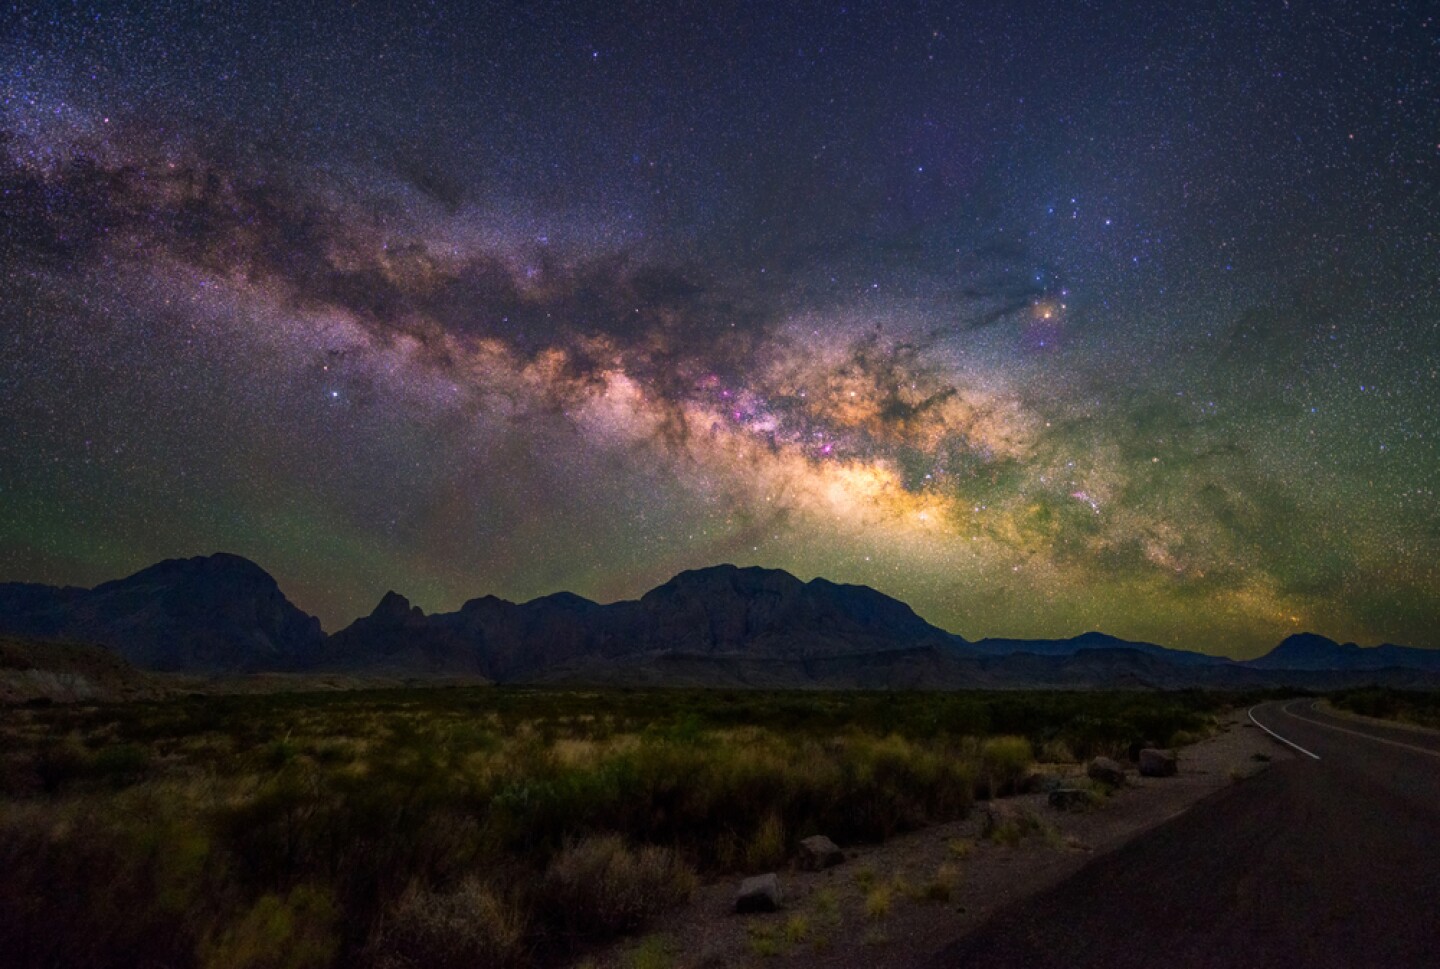 <h2>15. Greater Big Bend International Dark Sky Reserve, Texas and Mexico</h2> <p>Currently the largest land area on Earth protected for dark skies, roughly 9 million acres of protected nighttime darkness straddle the border in southwestern Texas and northern Mexico. While the reserve’s name only refers to <a class="Link" href="https://www.nps.gov/bibe/index.htm" rel="noopener">Big Bend National Park</a>, it also includes <a class="Link" href="https://tpwd.texas.gov/state-parks/big-bend-ranch" rel="noopener">Big Bend Ranch State Park</a> and <a class="Link" href="https://tpwd.texas.gov/huntwild/hunt/wma/find_a_wma/list/?id=2" rel="noopener">Black Gap Wildlife Management Area</a> in Texas, as well as three protected areas in <a class="Link" href="https://www.afar.com/travel-guides/mexico/guide" rel="noopener">Mexico</a>—Maderas del Carmen, Ocampo, and Cañón de Santa Elena. It is the world’s first binational International Dark Sky Reserve. </p> <p>Here, the Milky Way casts a dazzling, dappled glow across the inky canvas, and visitors can join guided night sky programs led by park rangers to understand better the cosmos and the importance of preserving natural darkness. It’s also possible to visit the McDonald Observatory in Fort Davis, Texas, for a deeper dive into the galaxy.</p>